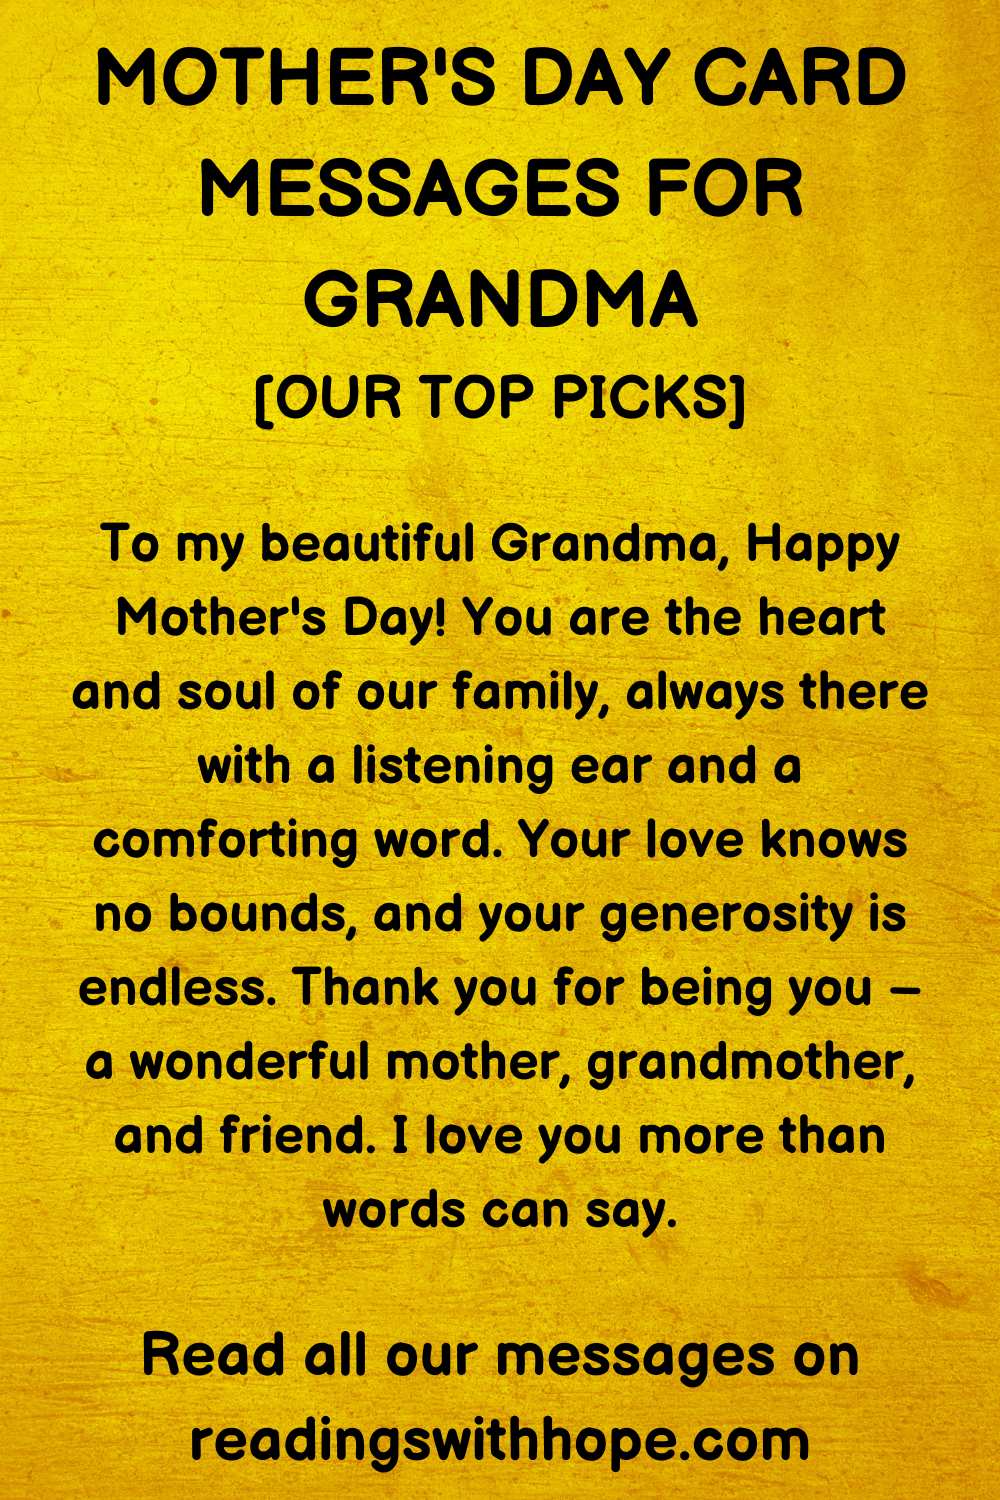 Mother's Day Card Message for grandma